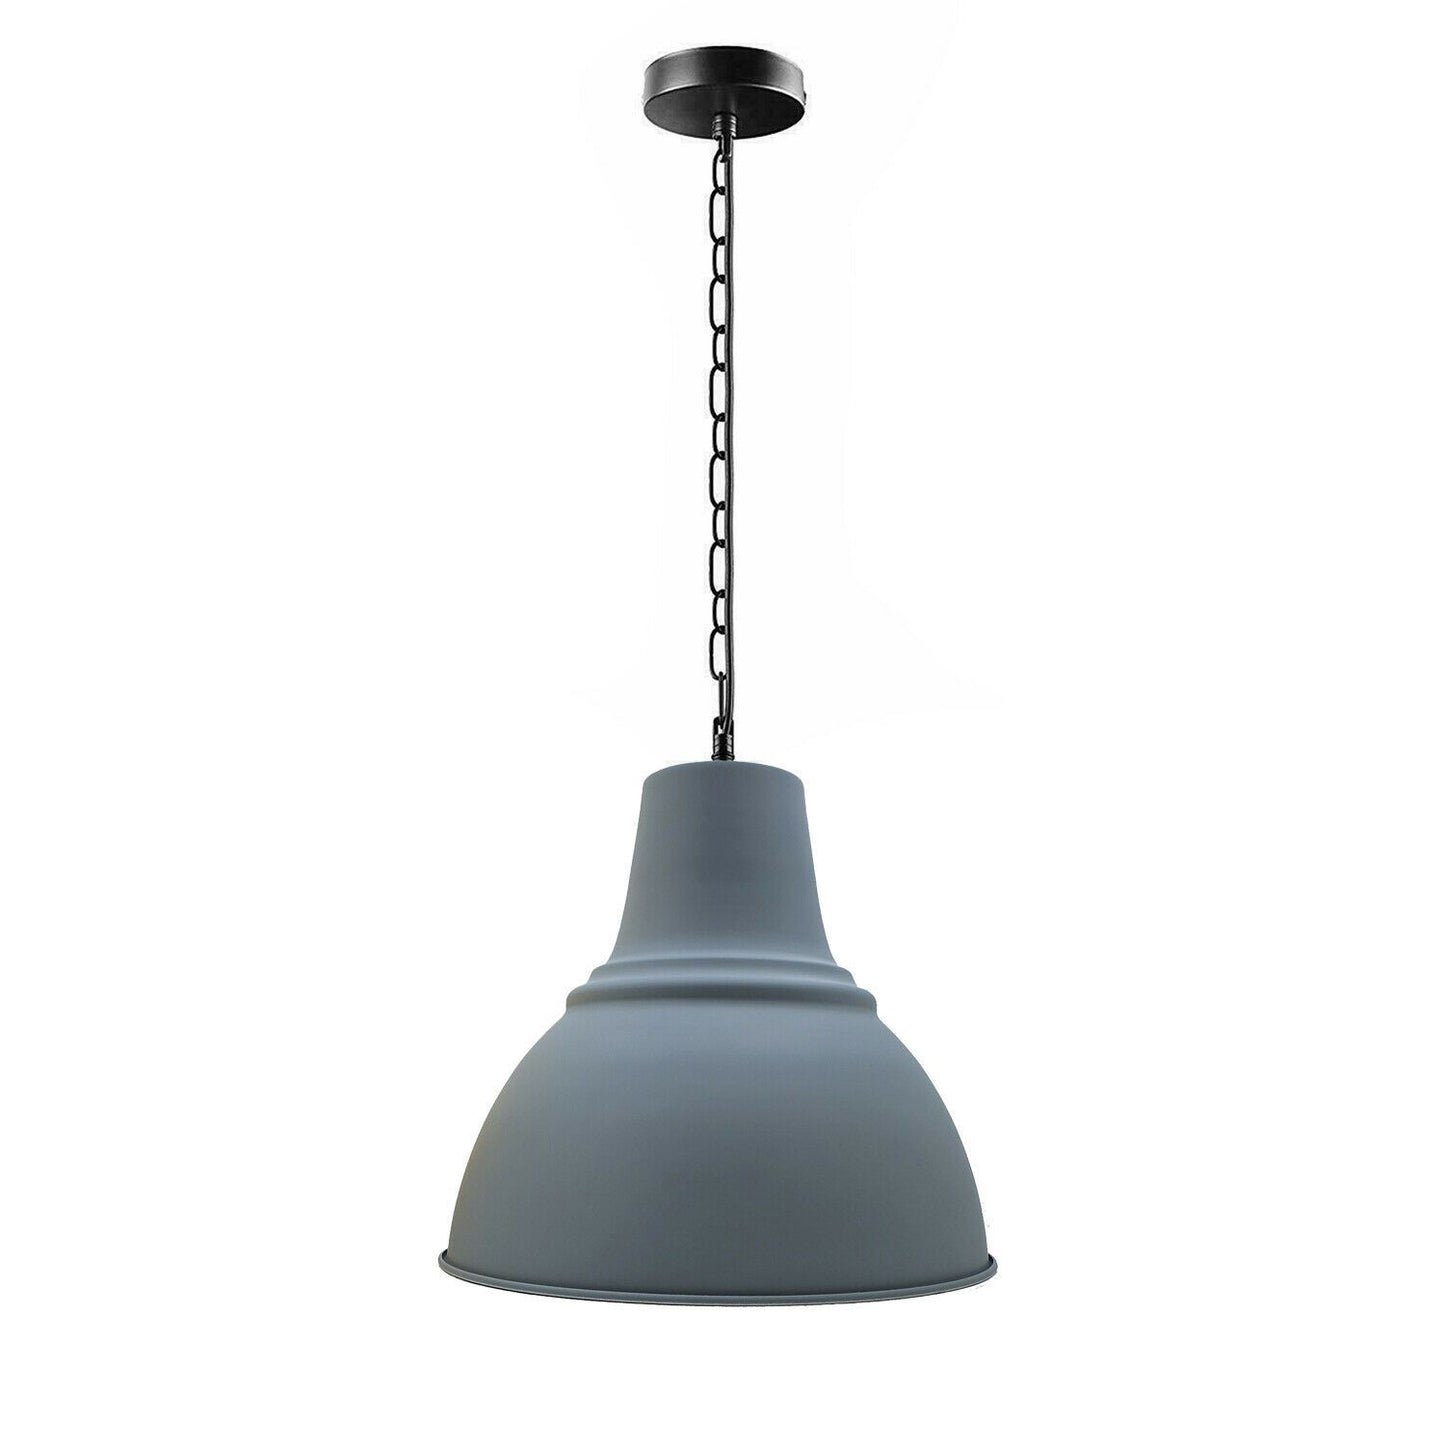 Modern Industrial Pendant Light Lamp Shade with FREE Bulbs Ceiling Light Lampshade LED Vintage - Vintagelite